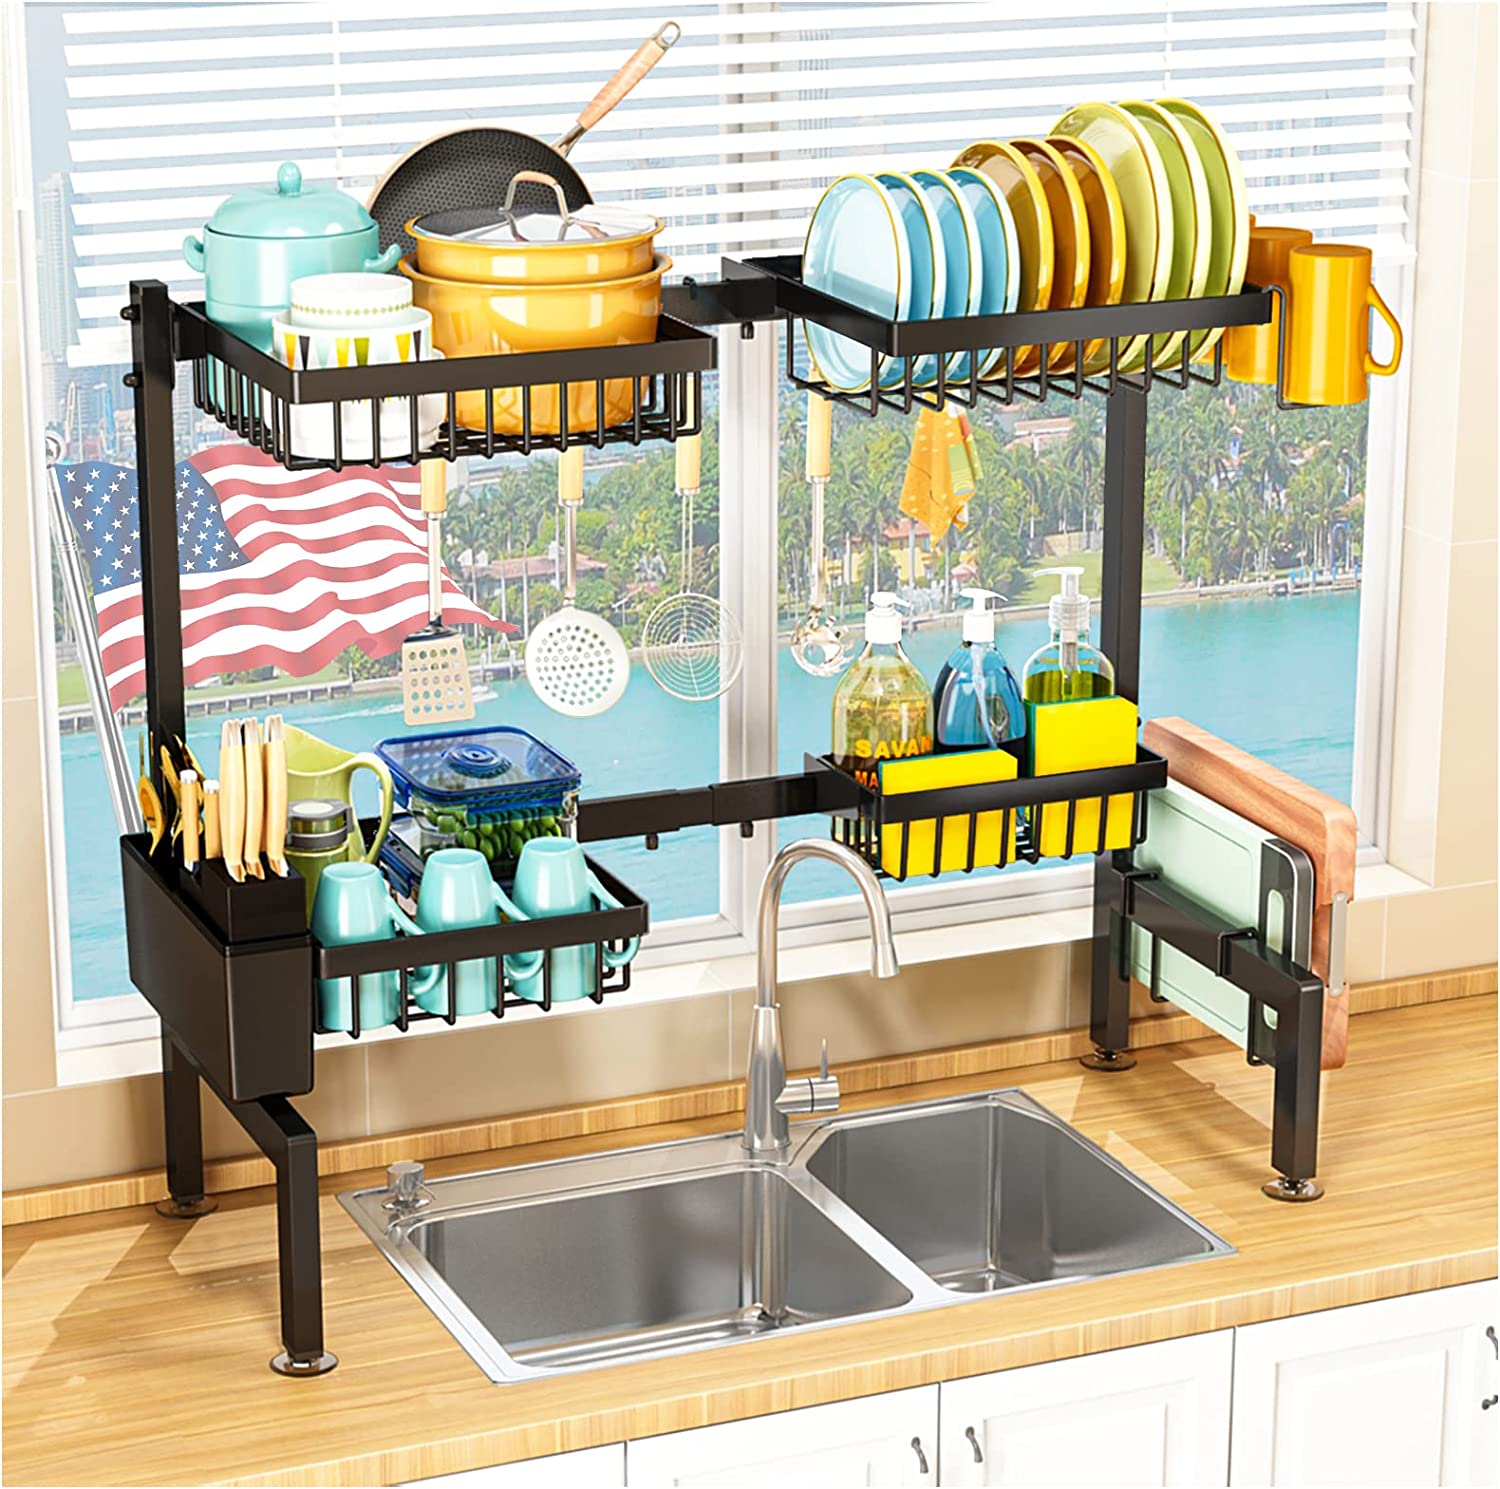  2023 Model，Over The Sink Dish Drying Rack 3-Tier Dish Drying  Rack Over Sink Adjustable Length(26-37.5in), Stainless Steel Dish Drainer, Dishes  Rack Kitchen Pots, pans, dishes and pots Organizer